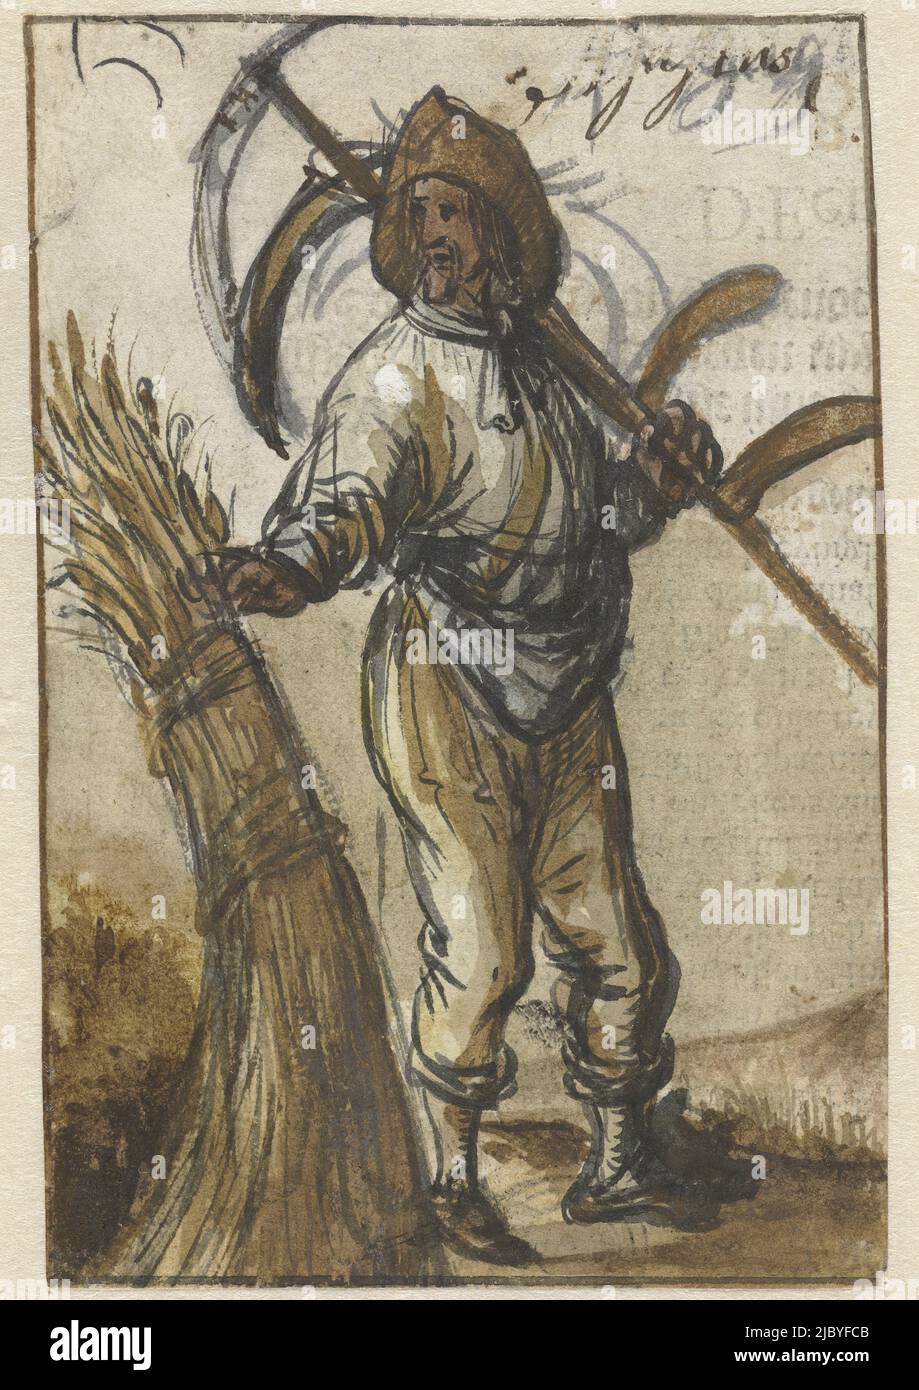 August, anonymous, 1600 - 1699, draughtsman: anonymous, 1600 - 1699, paper, brush, h 141 mm × w 94 mm Stock Photo